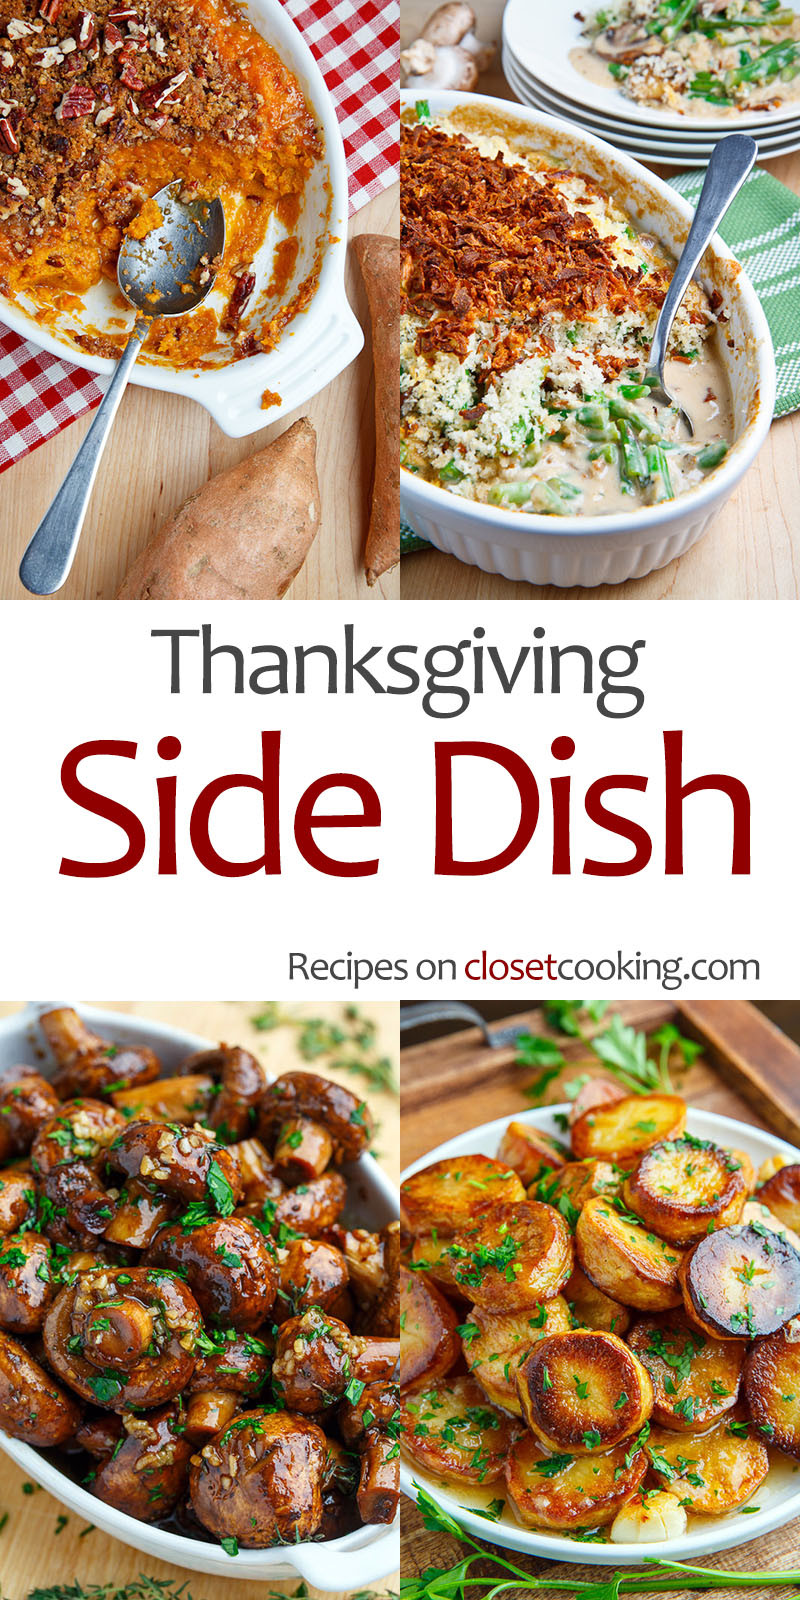 Thanksgiving Side Dishes Pinterest
 Thanksgiving Side Dish Recipes Closet Cooking